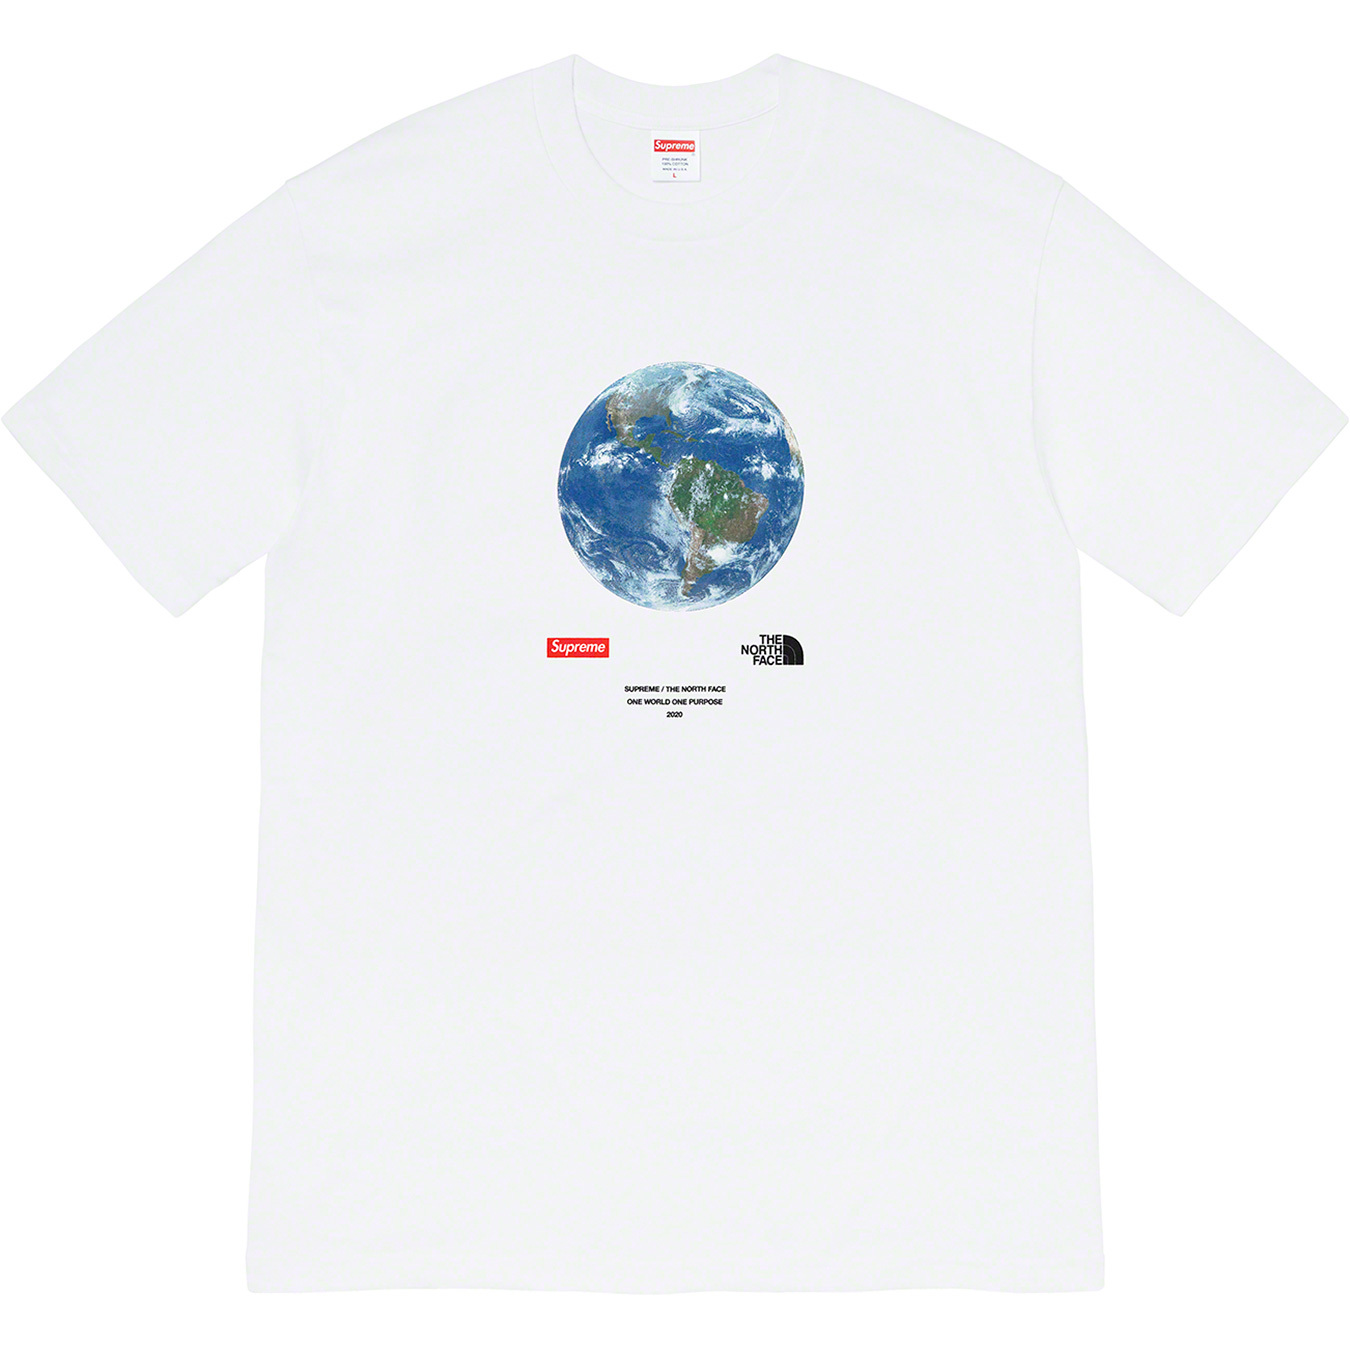 Supreme®/The North Face® One World Tee | Supreme 20ss